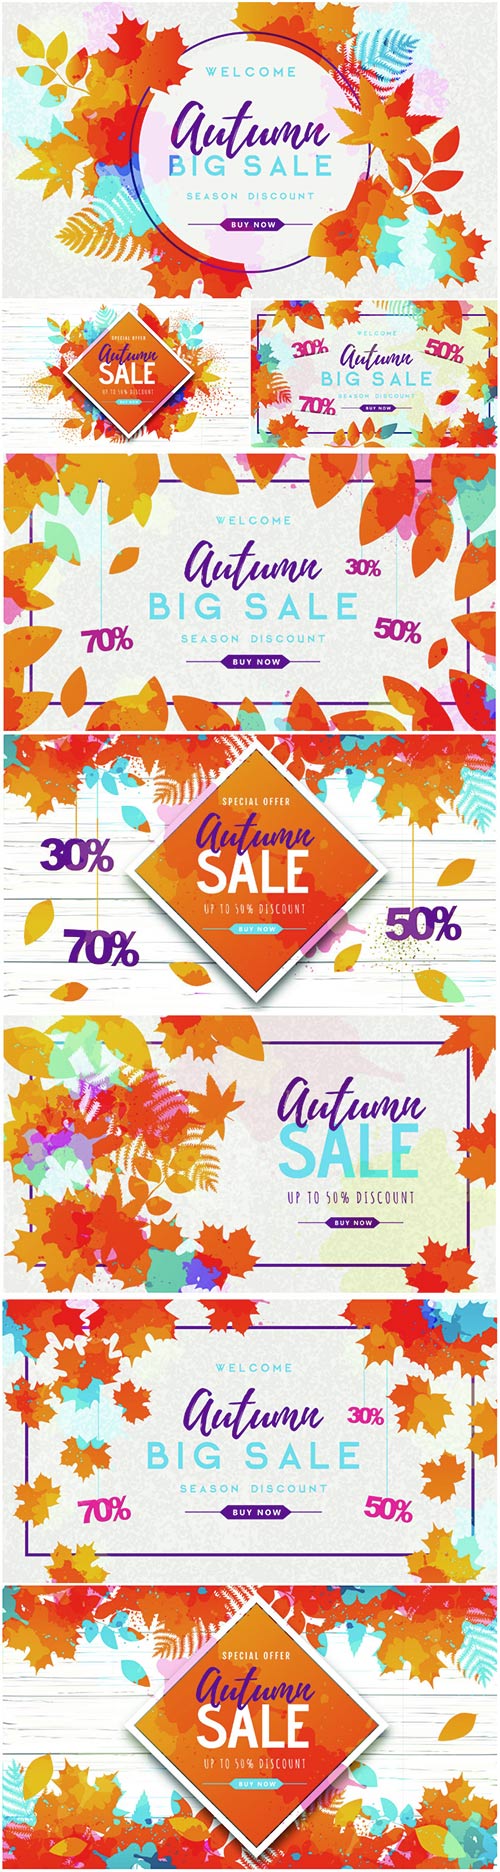 Autumn big sale watercolor poster with autumn leaves